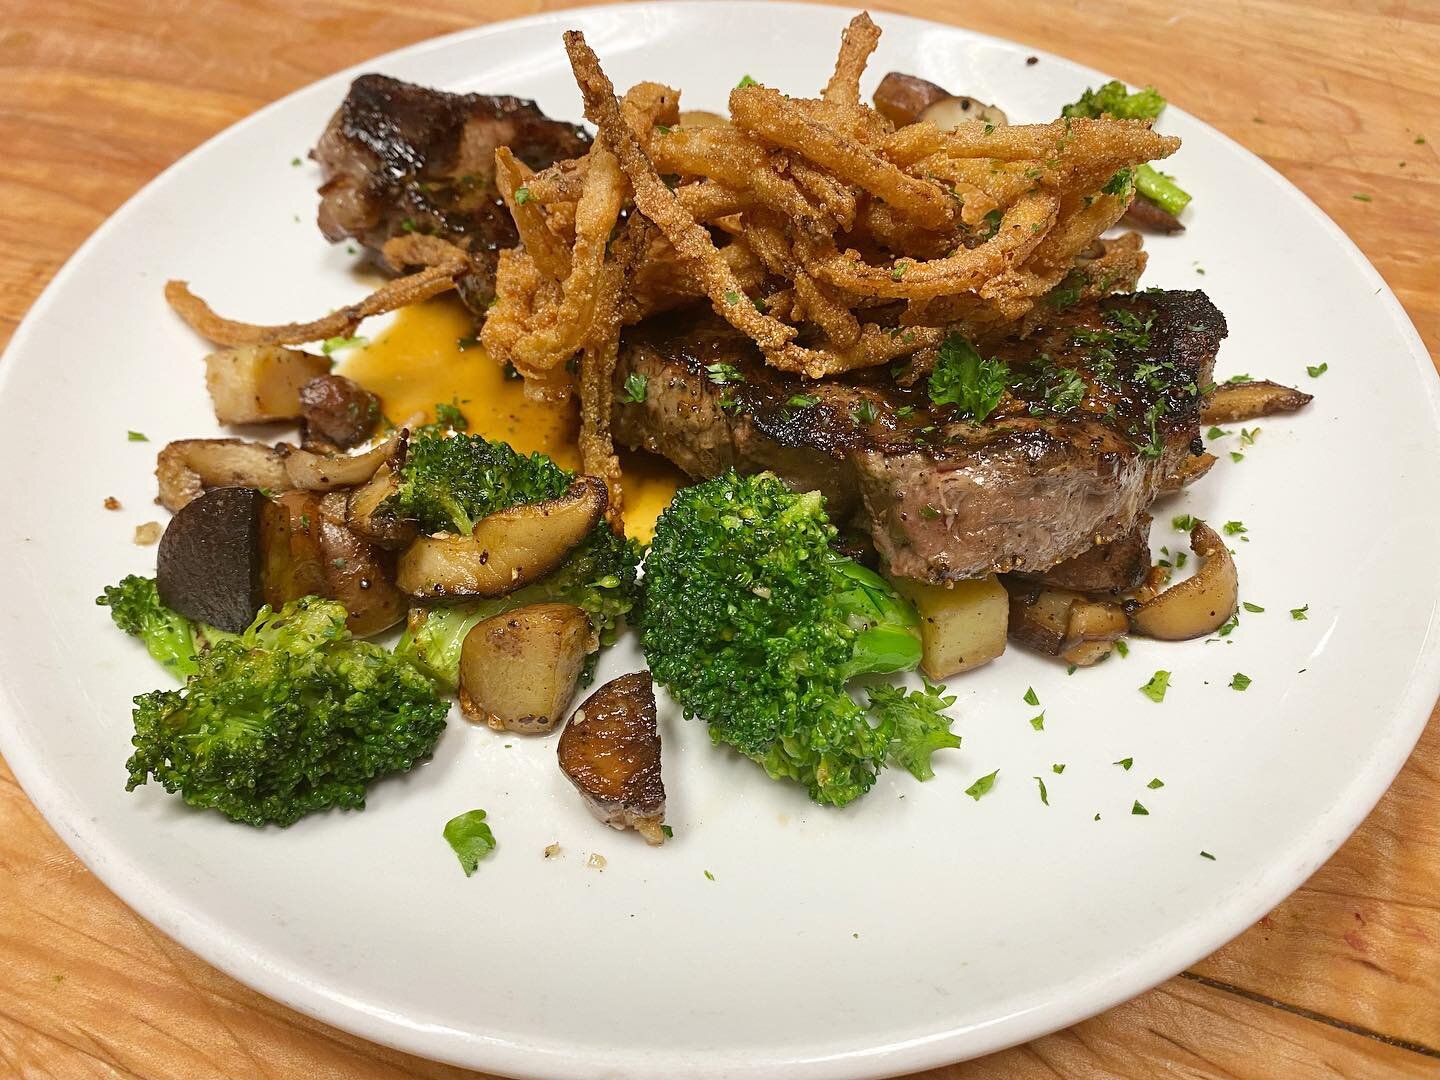 @bedientfarms NY strip steak, beef fat roasted heirloom potatoes, local shiitakes, broccoli and buttermilk onion rings. 

#localsonlybro #roc #rocfoodies